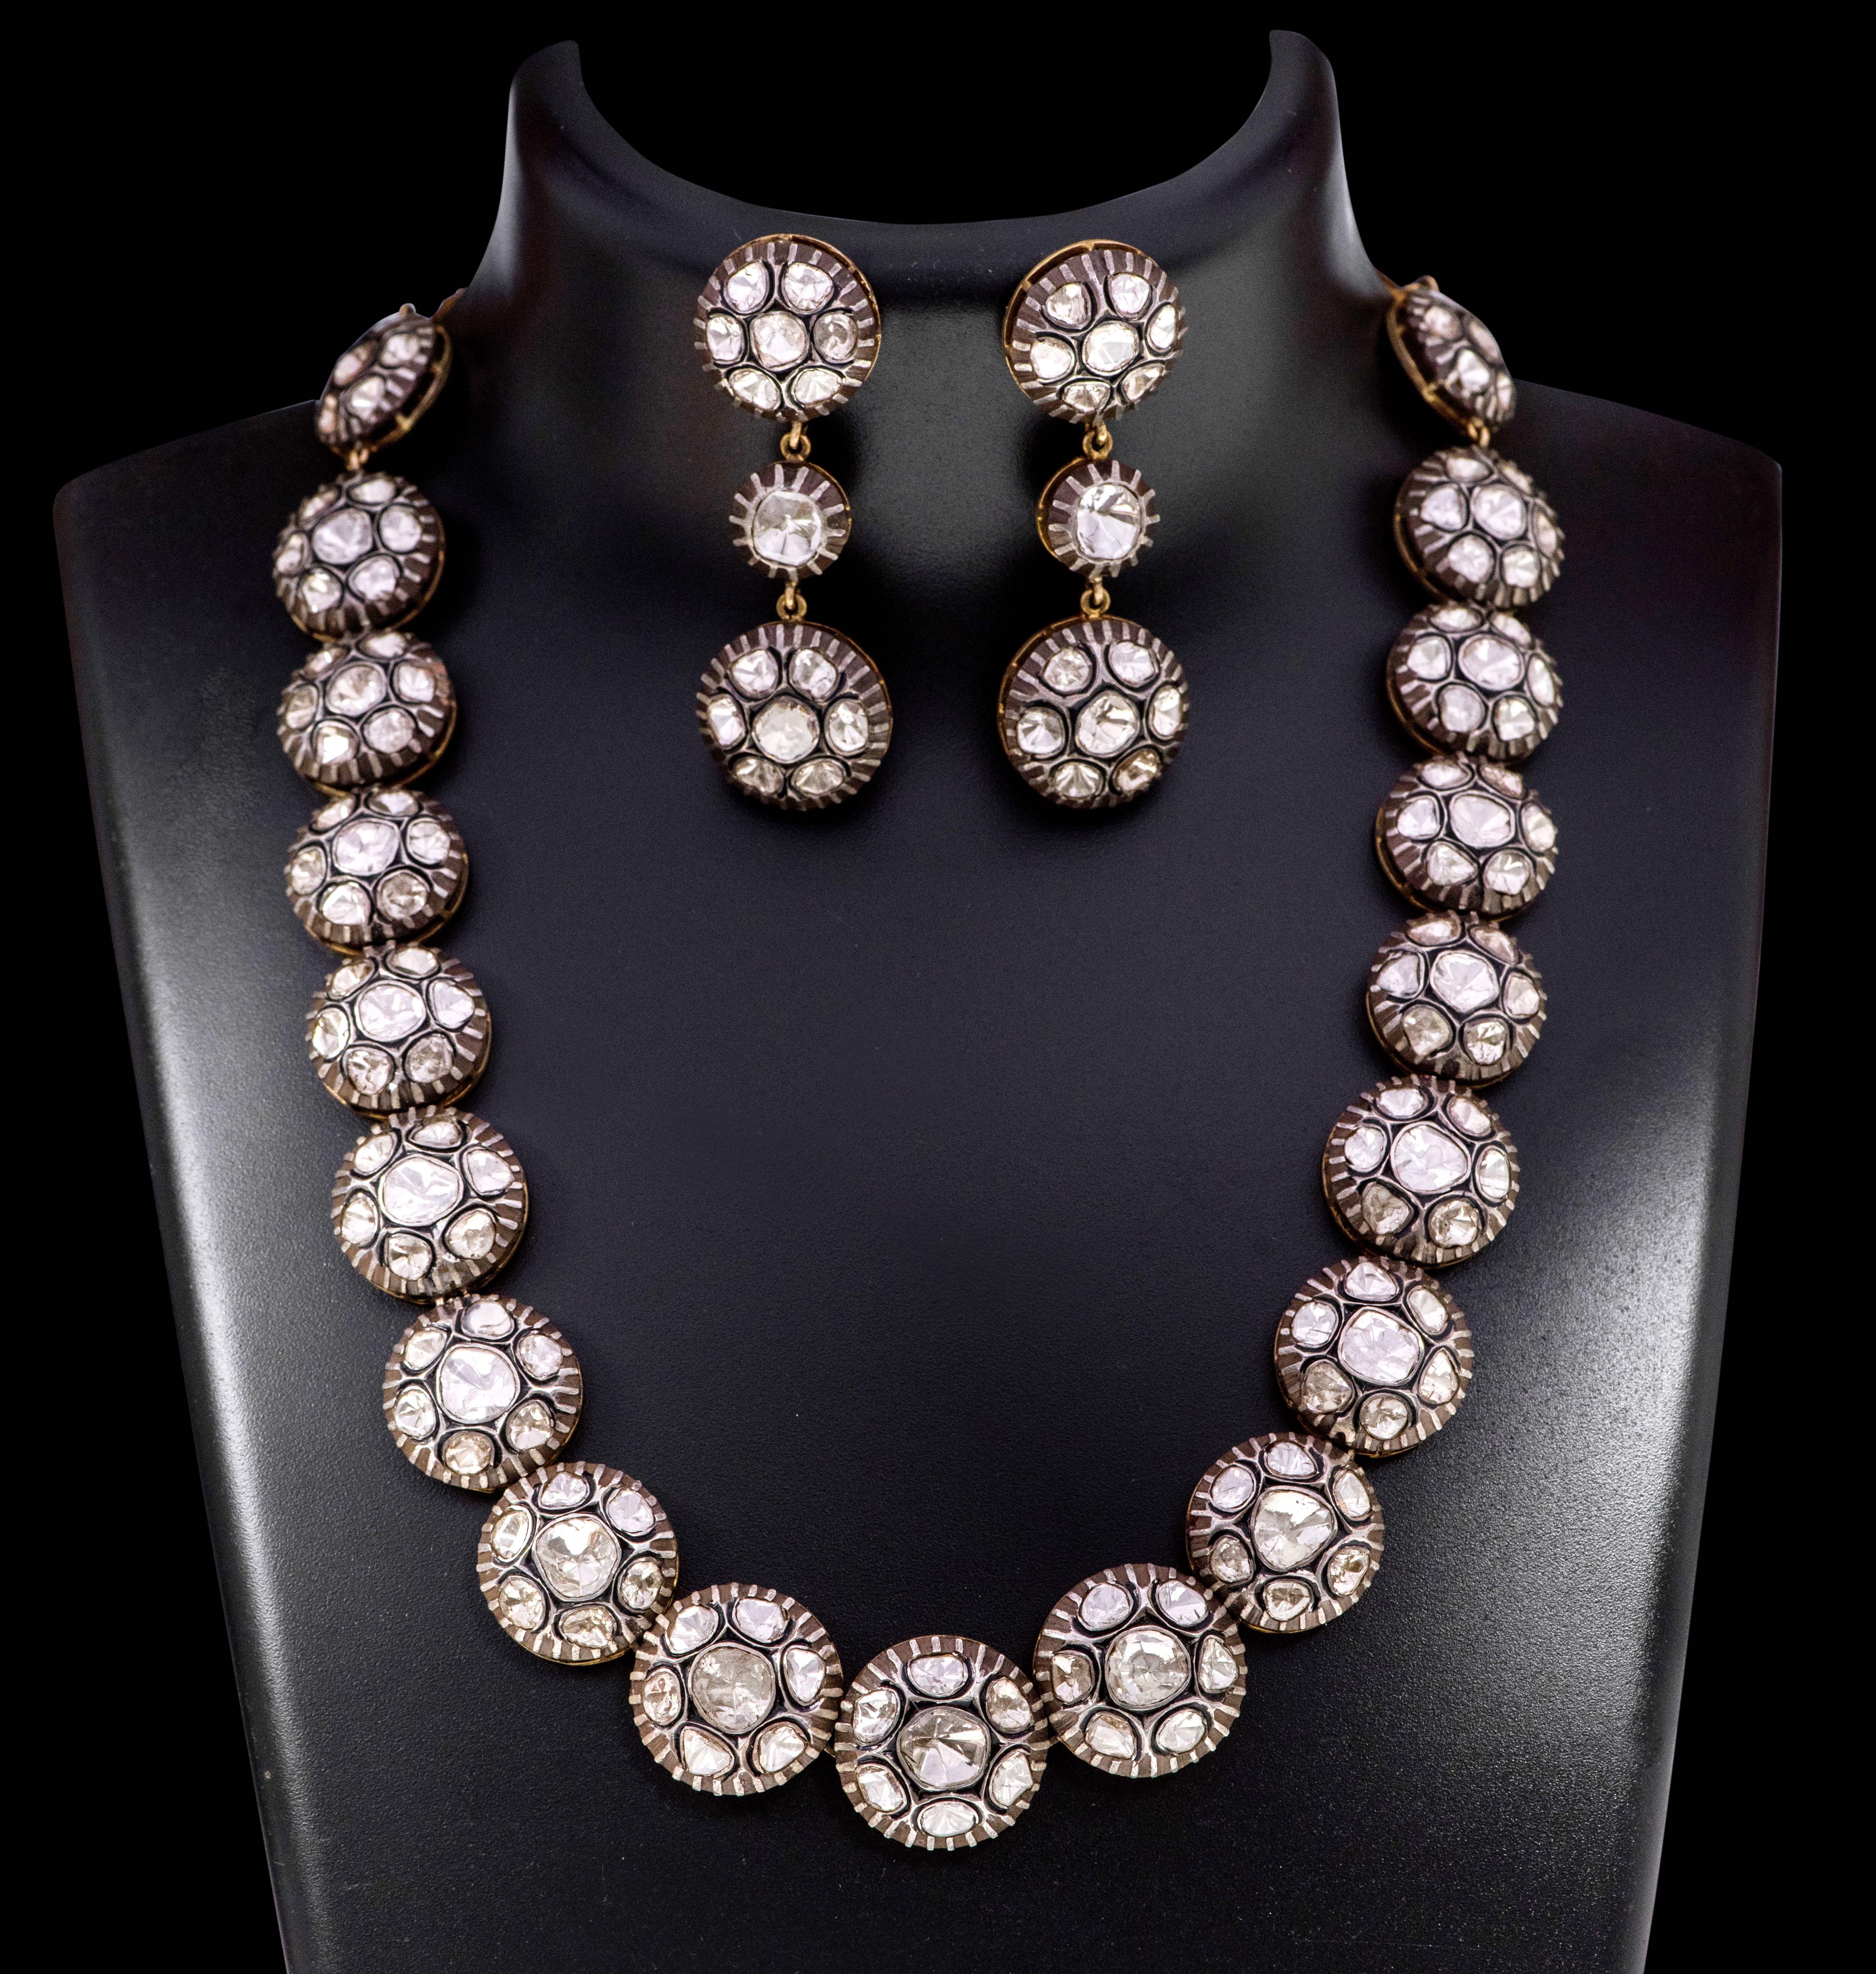 Art-Deco Victorian Style Polki Diamond Necklace and Earrings Set

This Victorian period art-deco atypical polki diamond full necklace is impressive. The uneven oval-round shape flat polki diamond solitaire set in bezel setting surrounds the bigger